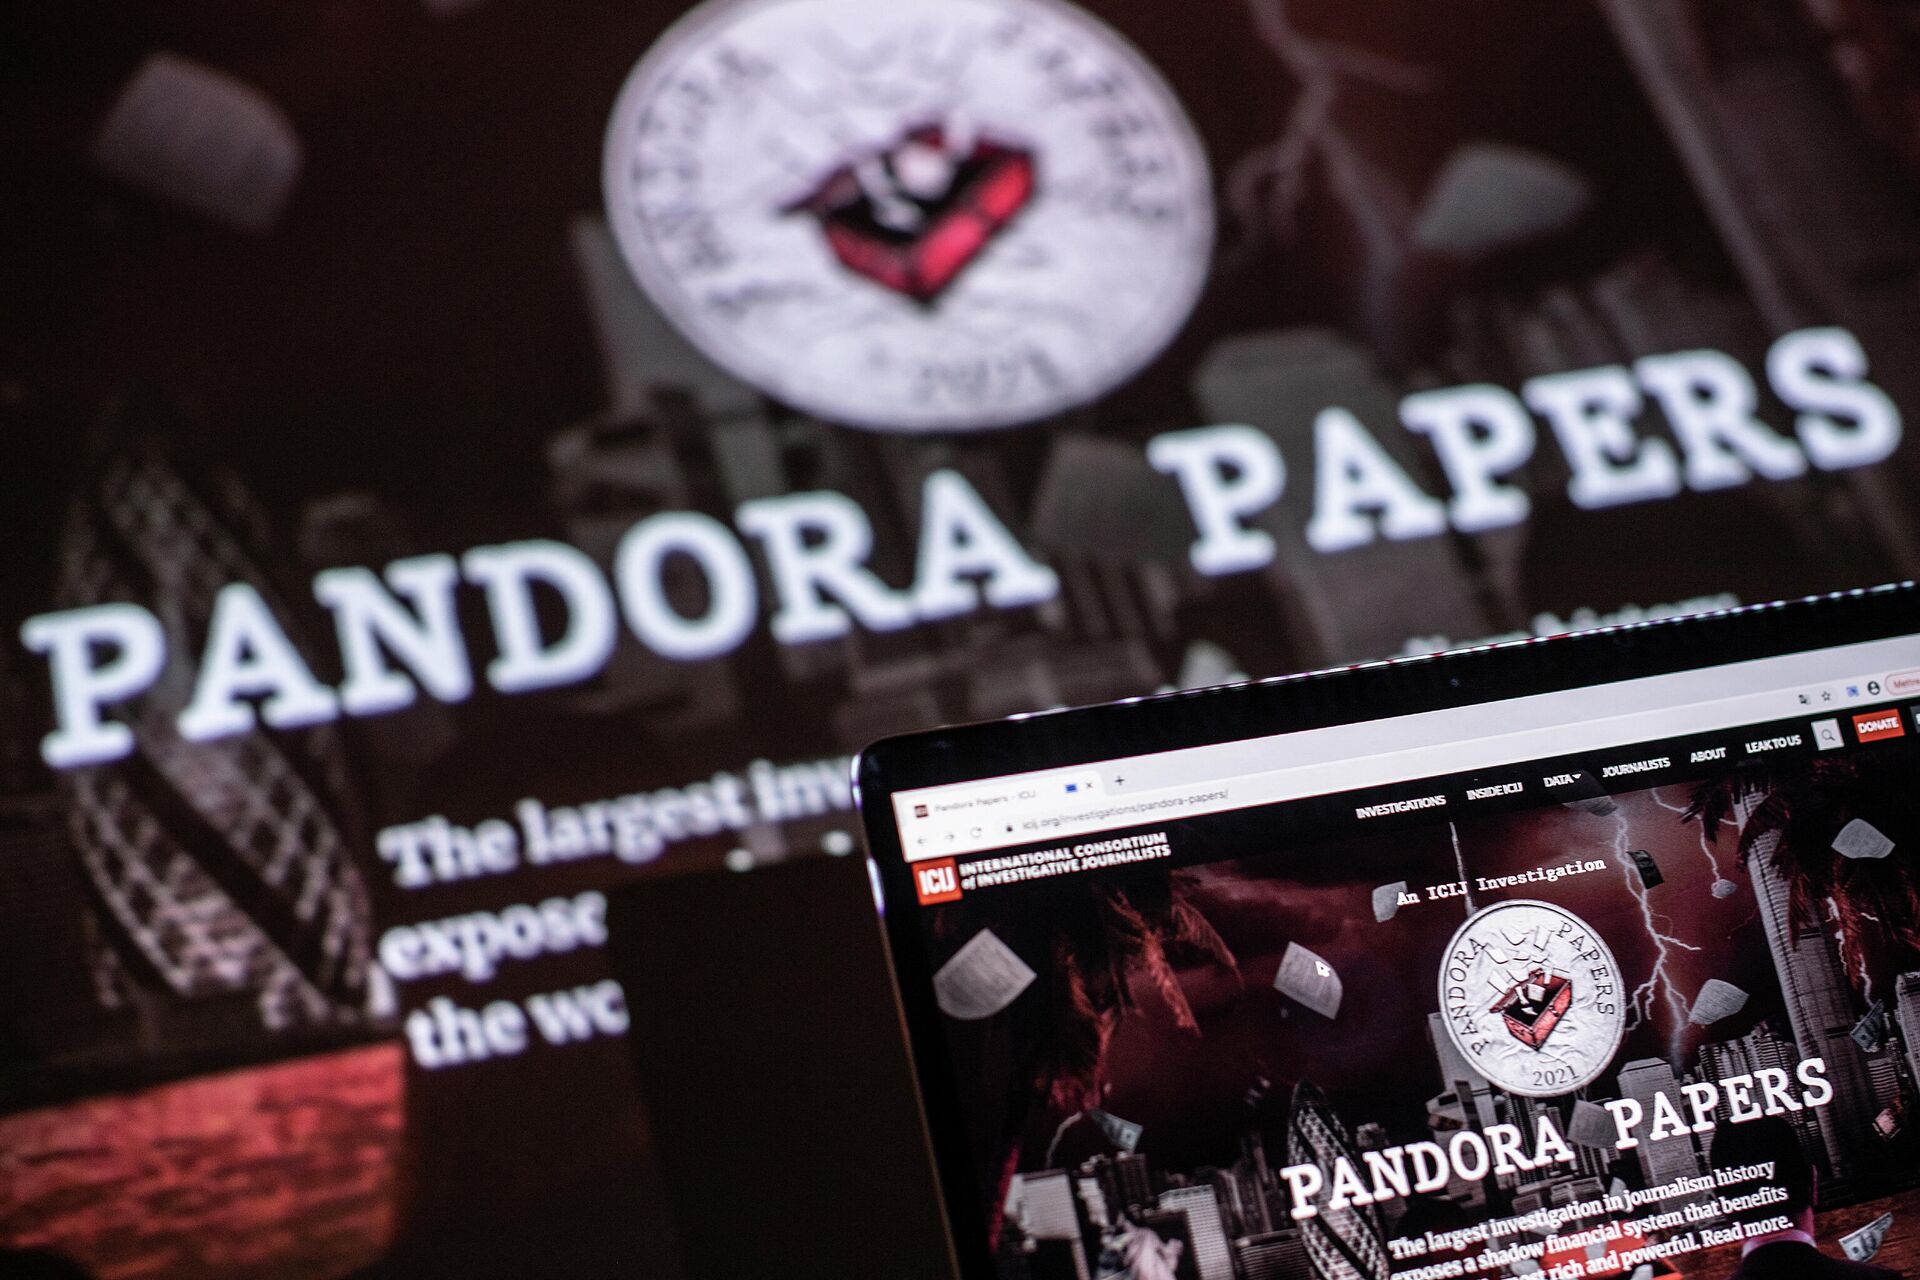 This photograph illustration shows the logo of Pandora Papers, in Lavau-sur-Loire, western France, on October 4, 2021 - Sputnik International, 1920, 06.10.2021